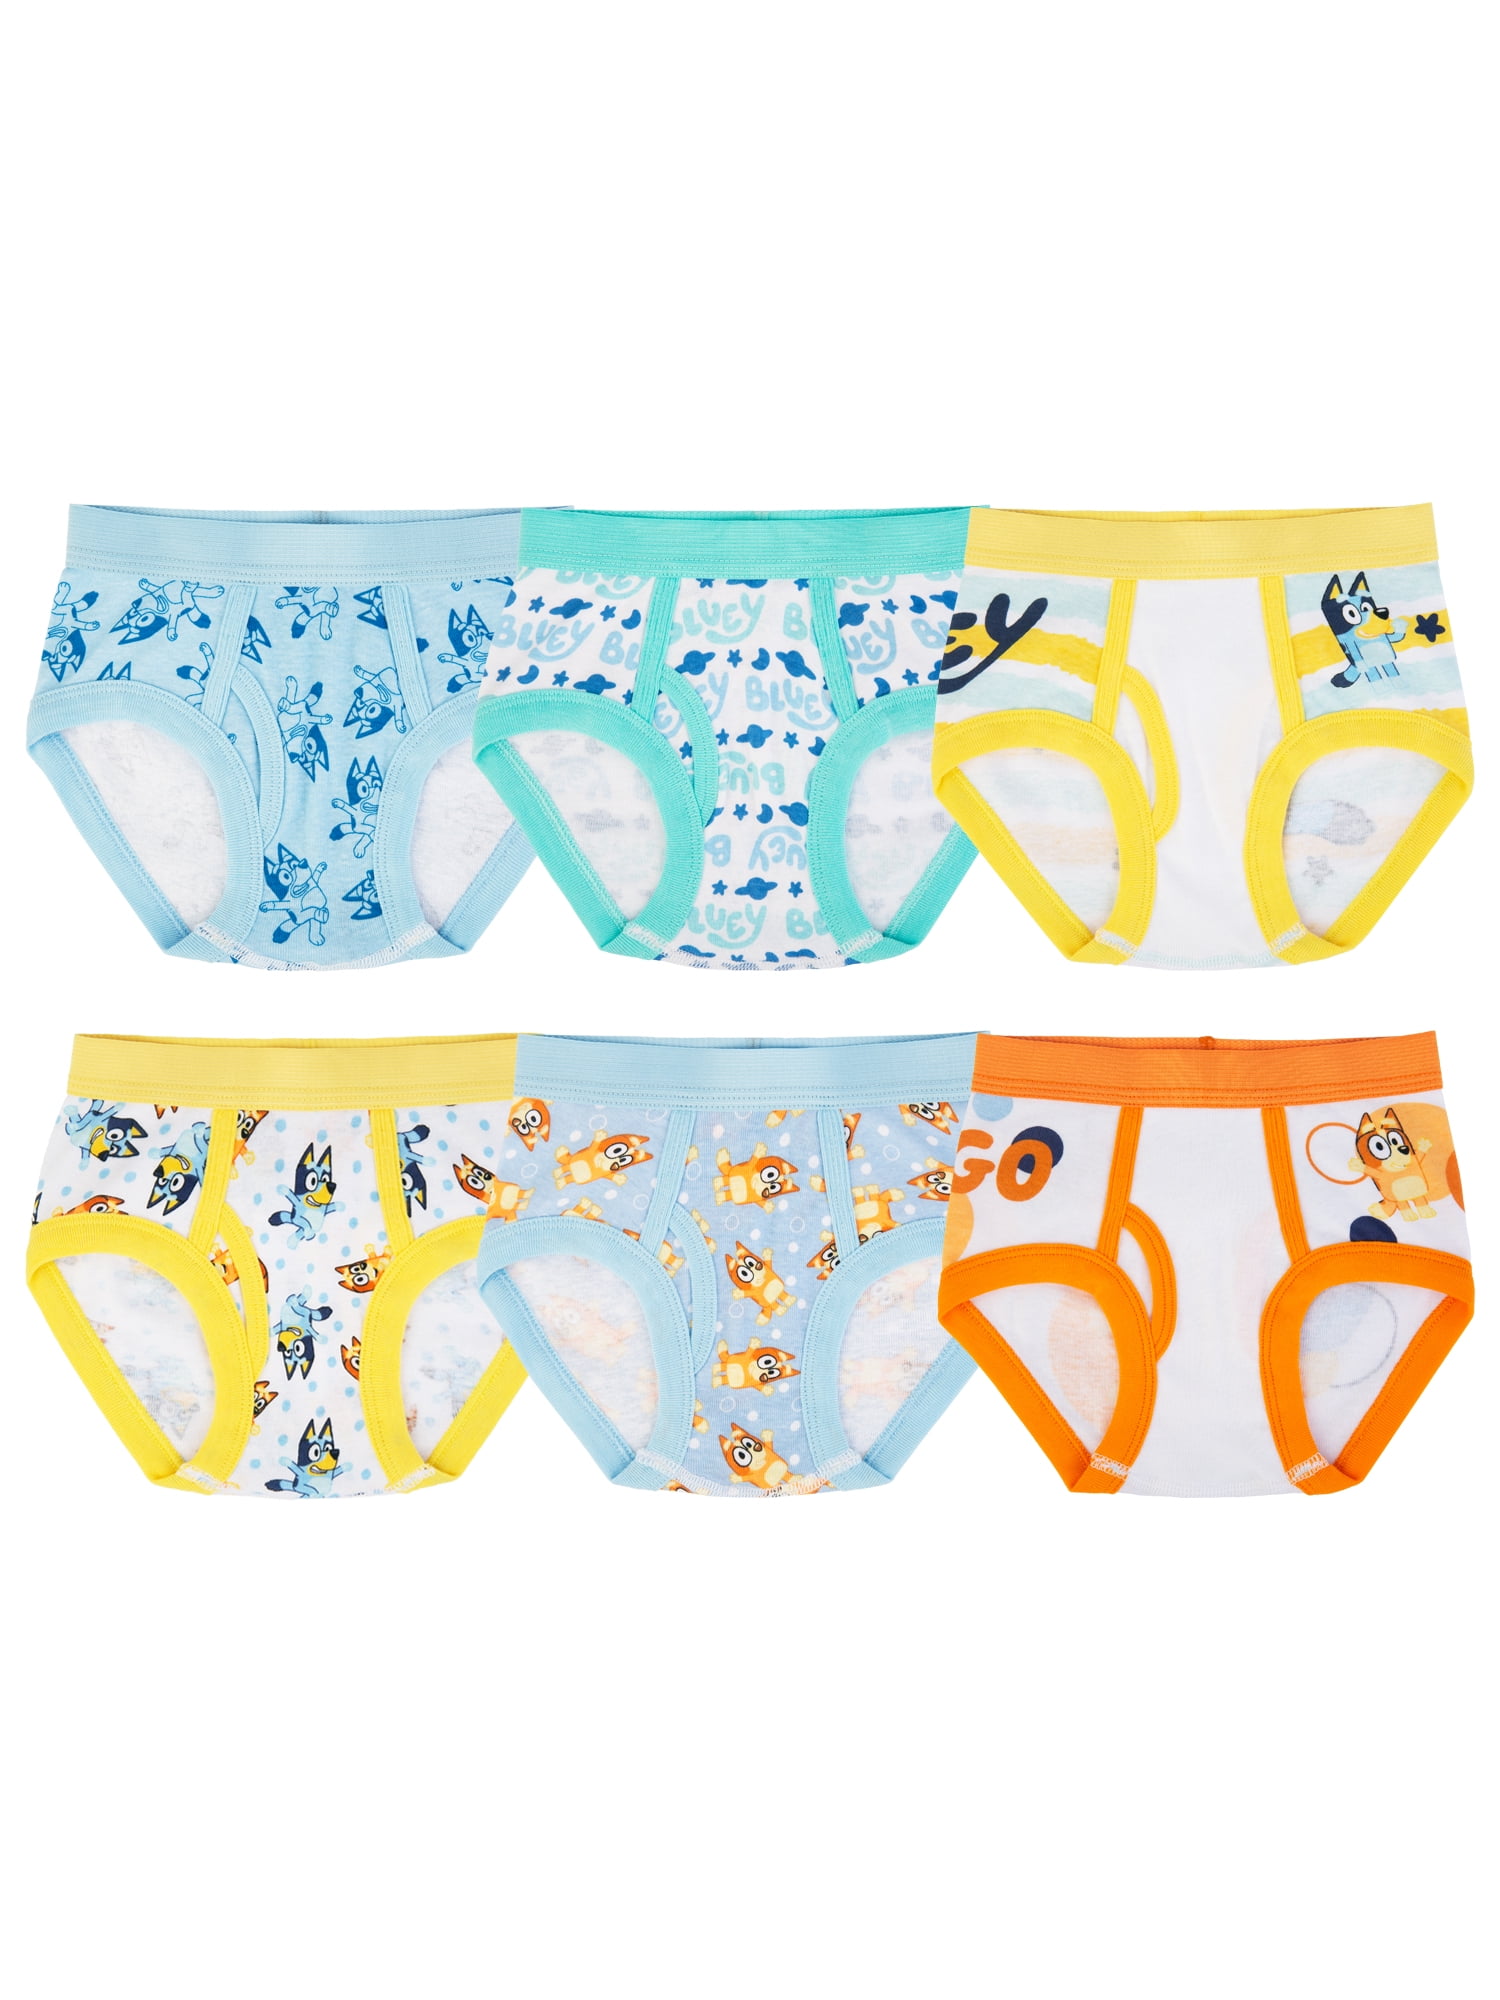 LeapFrog Bluey Toddler Boys' Briefs With Elastic Band (3T (3